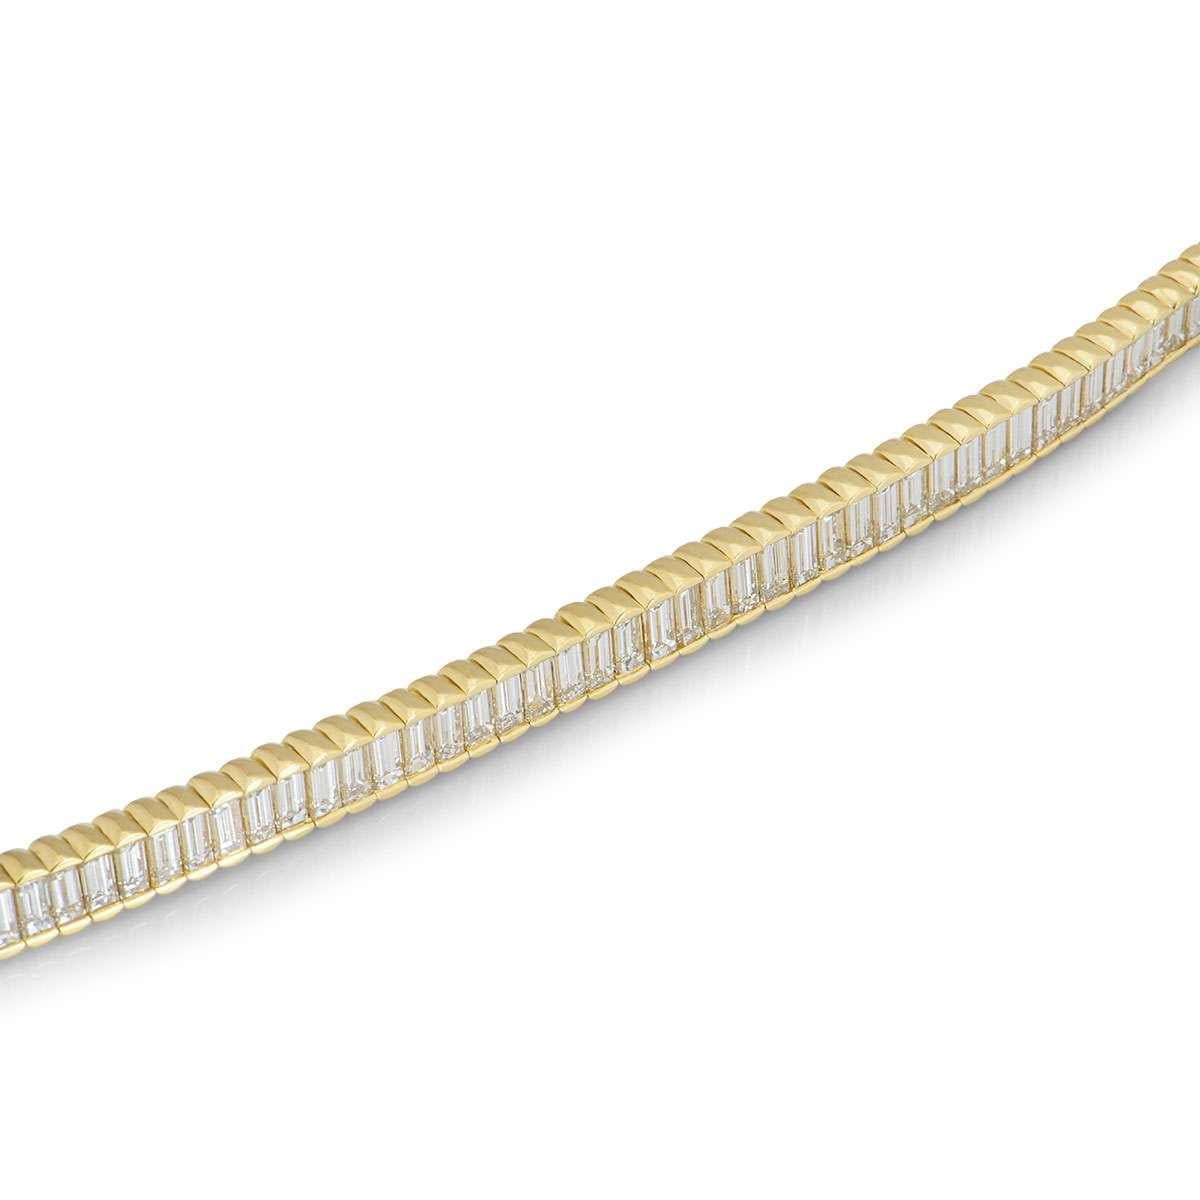 A beautiful 18k yellow gold diamond line bracelet. The bracelet features 72 baguette cut diamonds set within a yellow gold tension setting with a total weight of approximately 11.52ct. The bracelet measures 7 inches in length and is complete with a